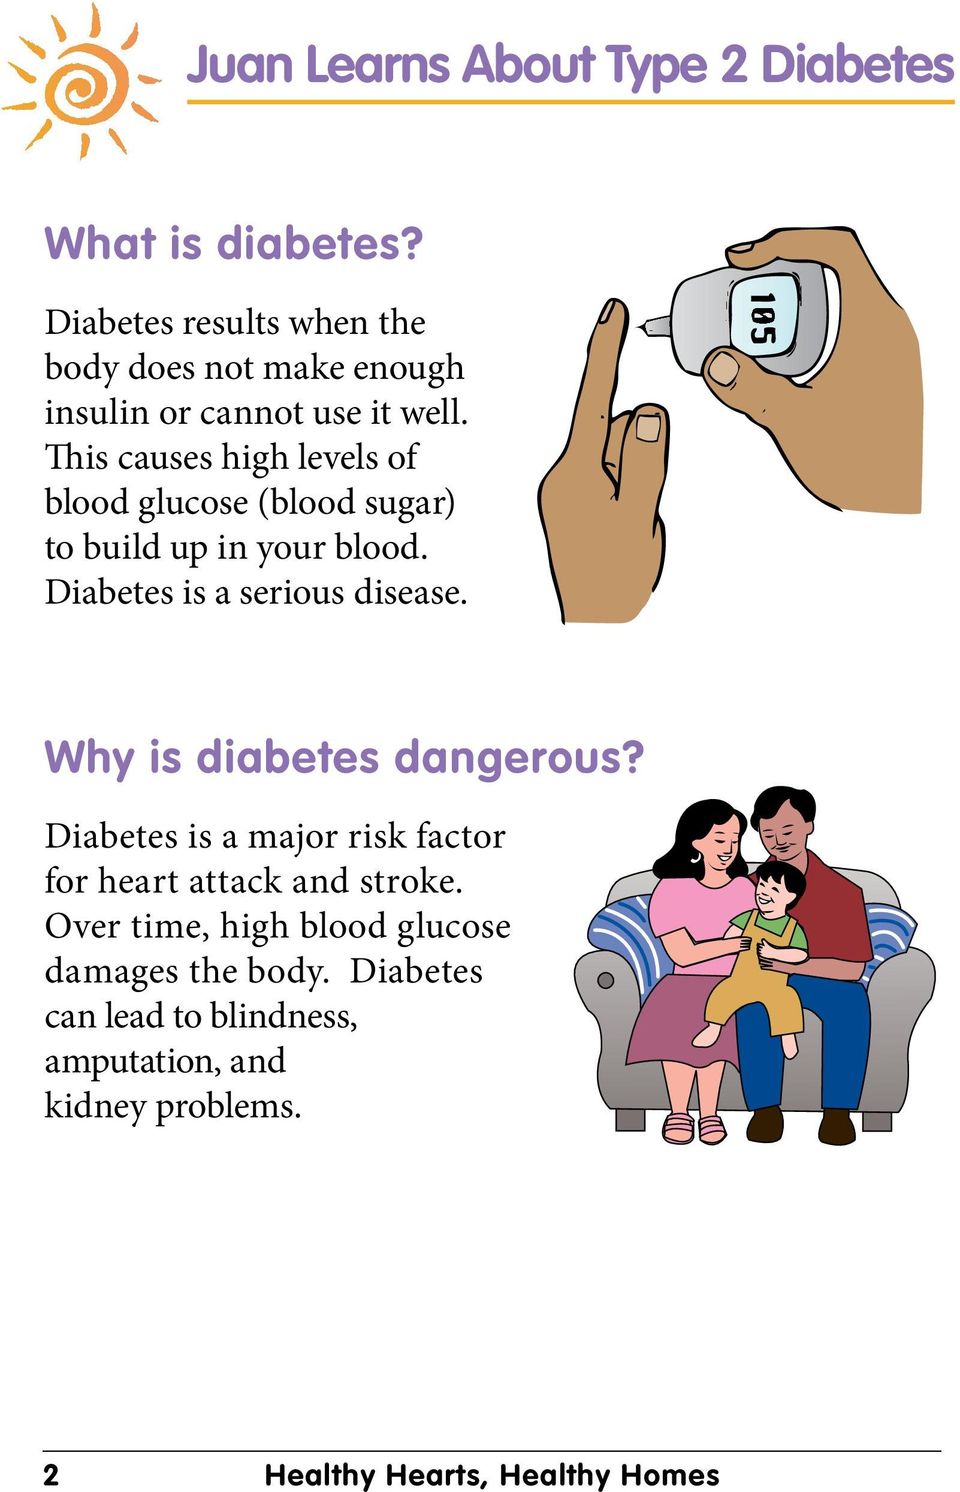 This causes high levels of blood glucose (blood sugar) to build up in your blood. Diabetes is a serious disease.